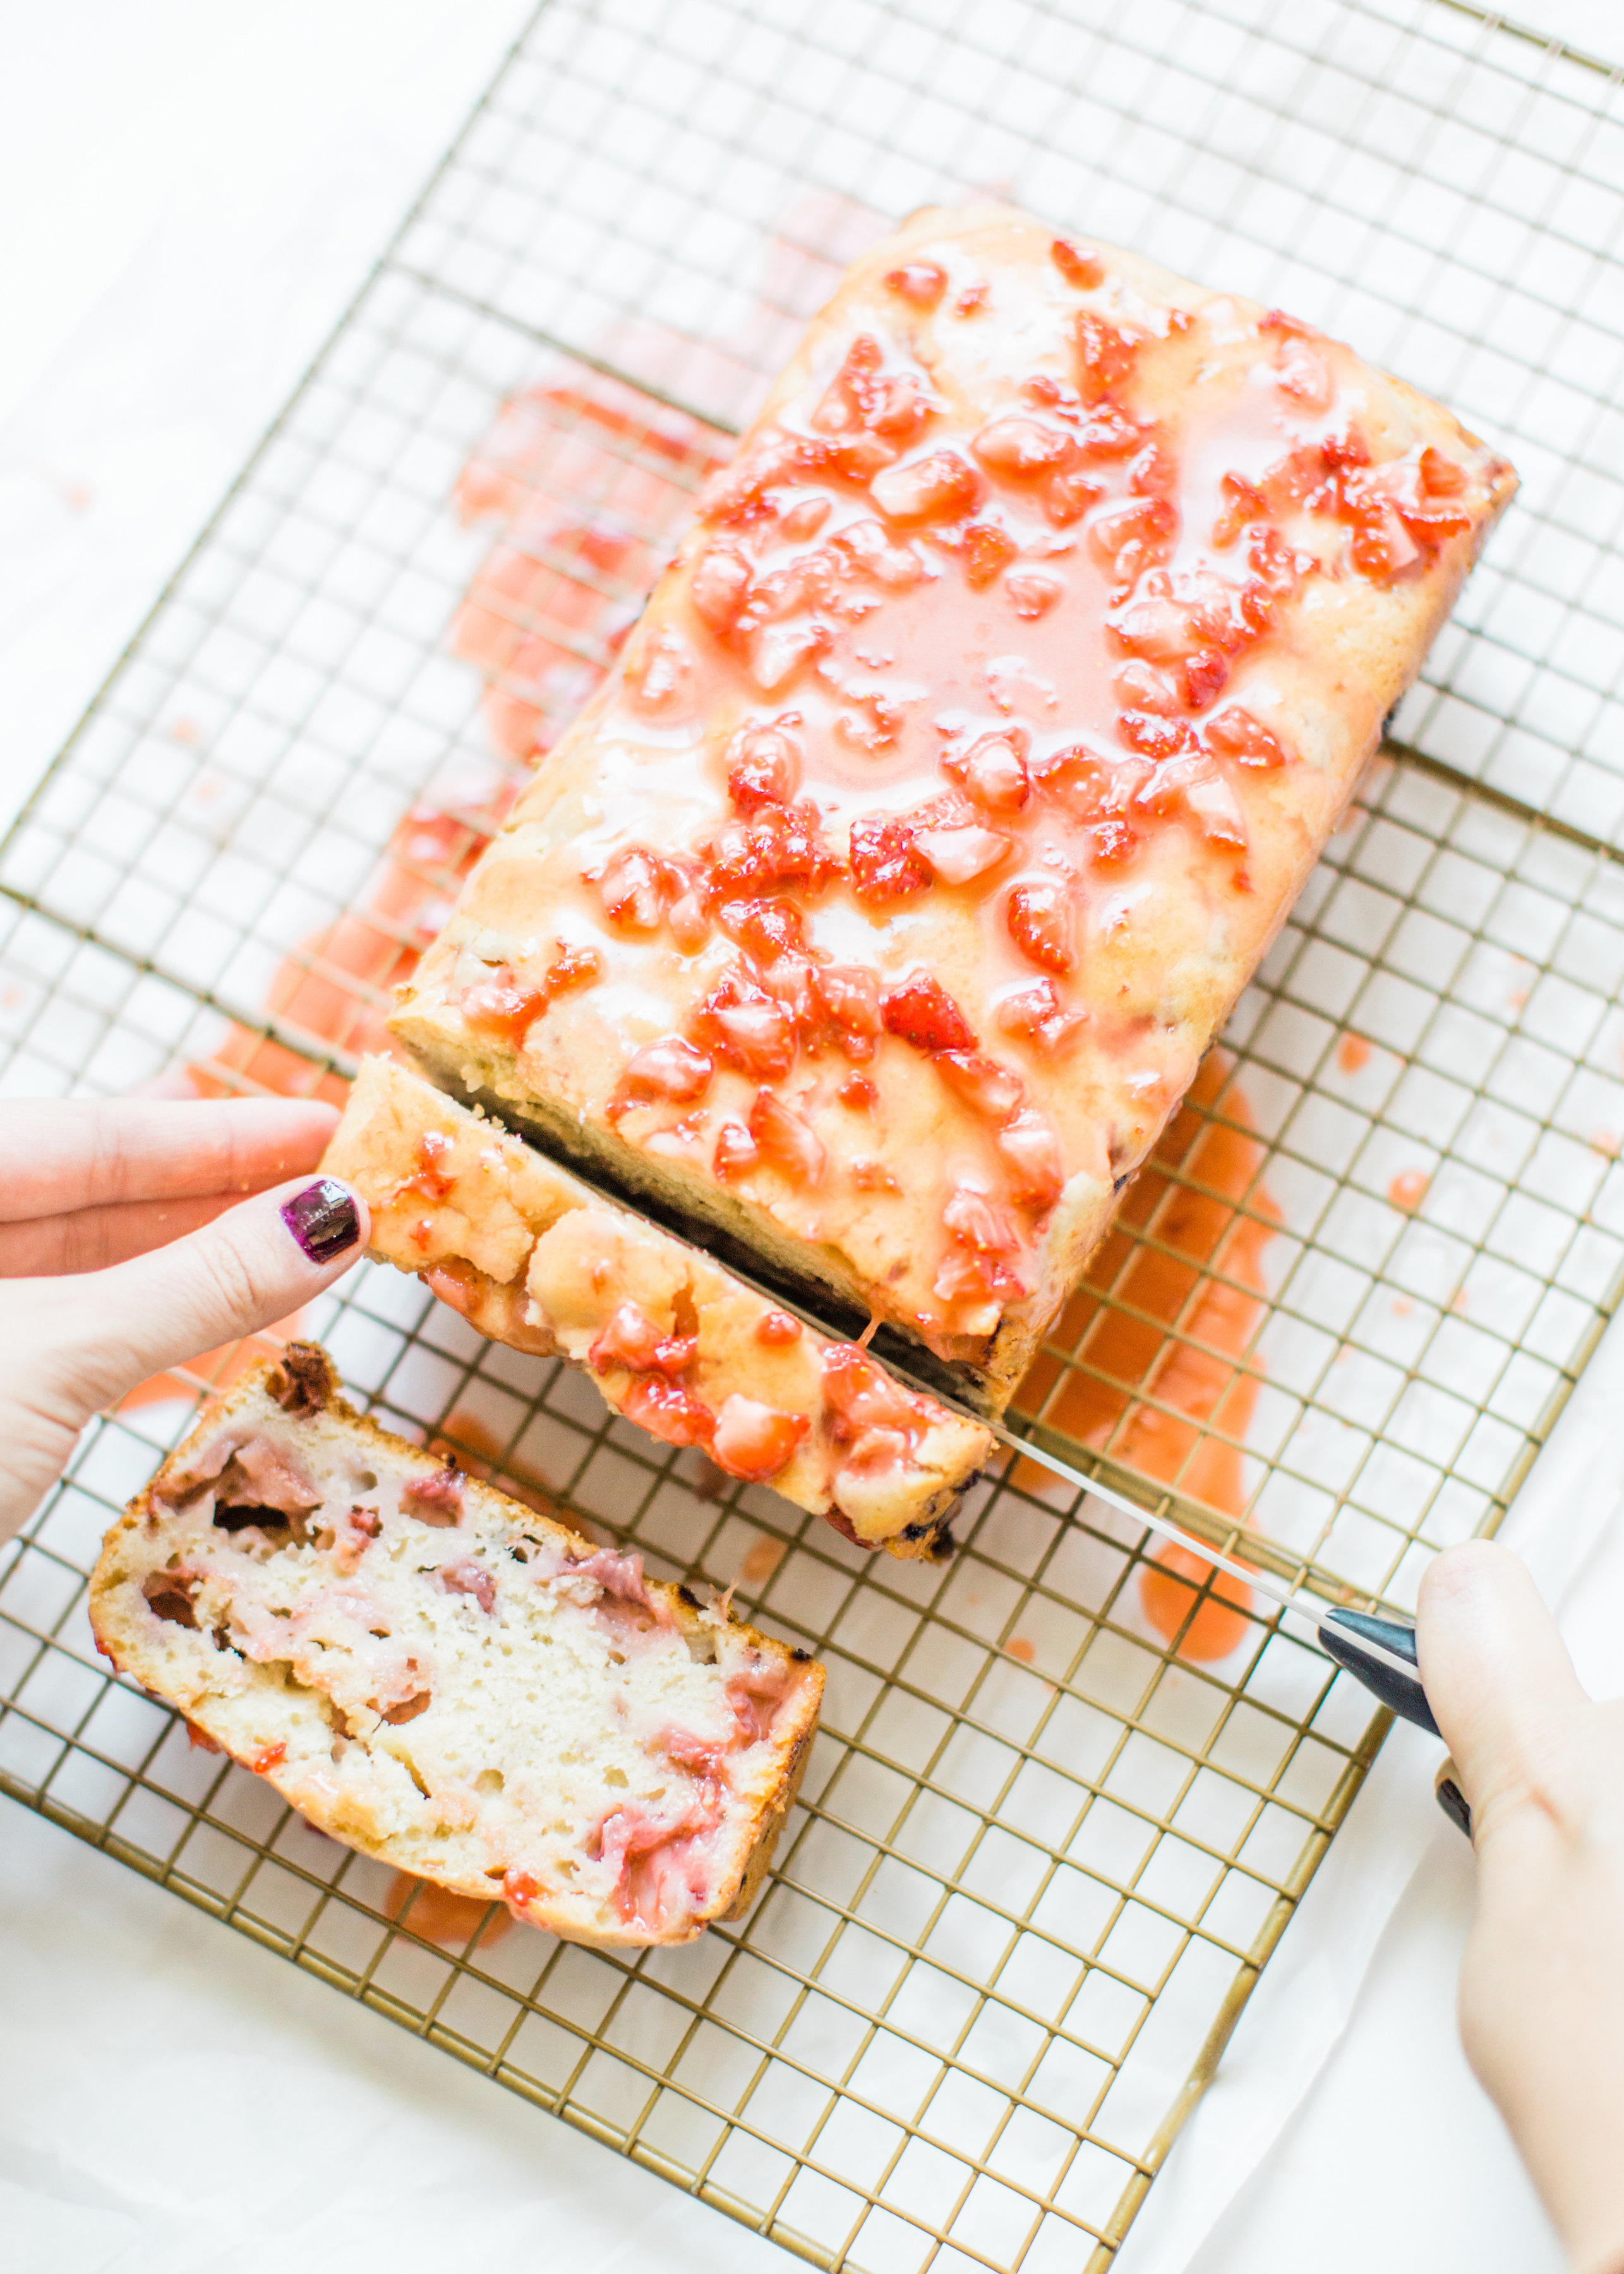 If you love strawberries, you are going to go crazy for this knock-your-socks-off easy and delicious strawberry bread with a decadent strawberry glaze. This quick bread recipe comes together in just 10 minutes, and will impress EVERYONE. #strawberrybread #quickbread #dessert #strawberrycake Click through for the recipe. | glitterinc.com | @glitterinc